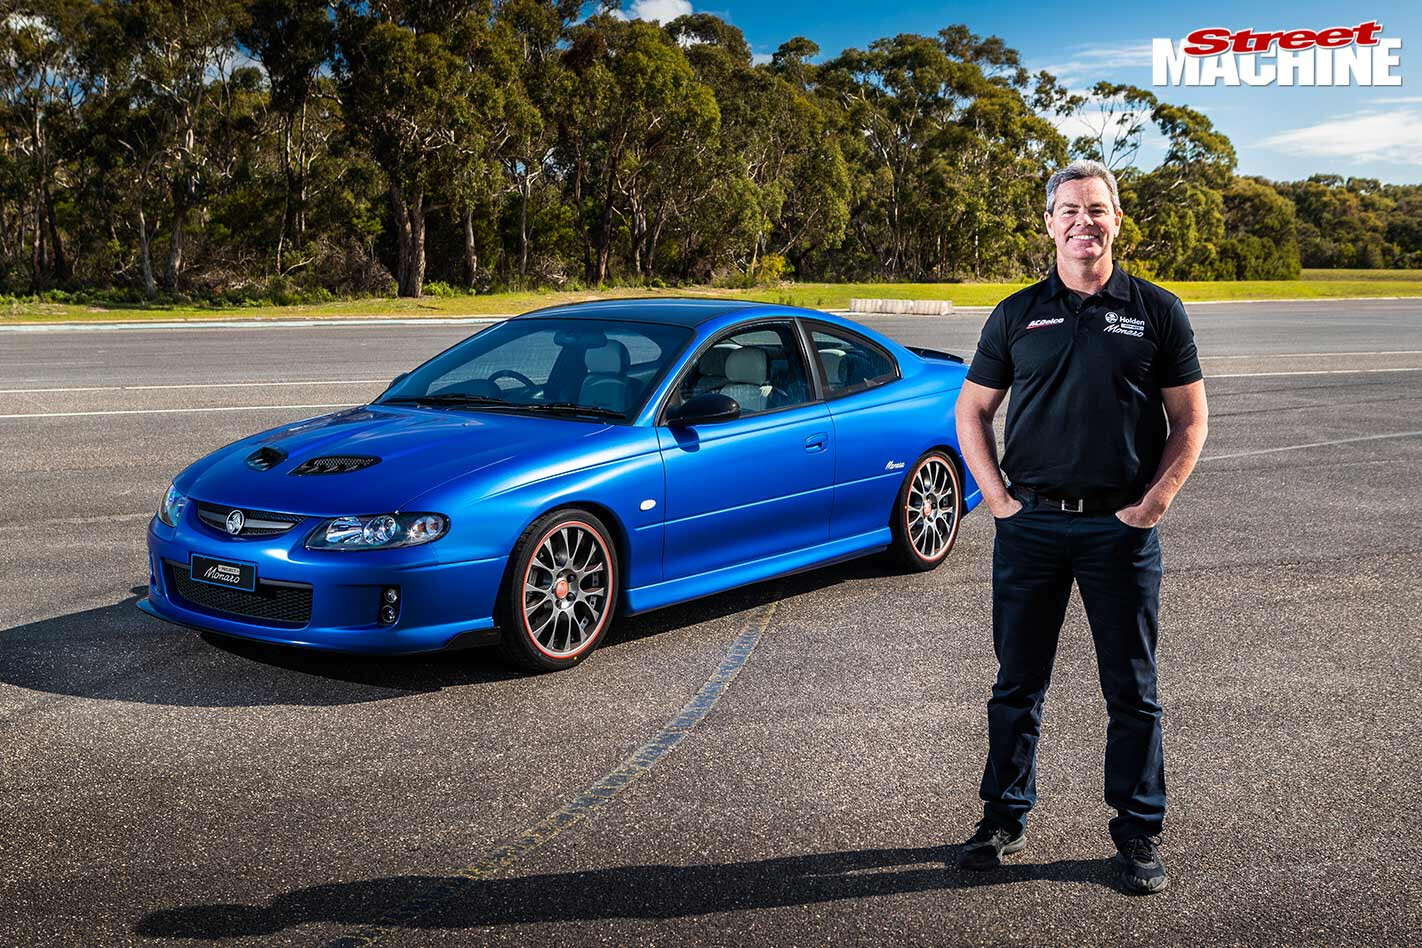 Project Monaro is up for sale